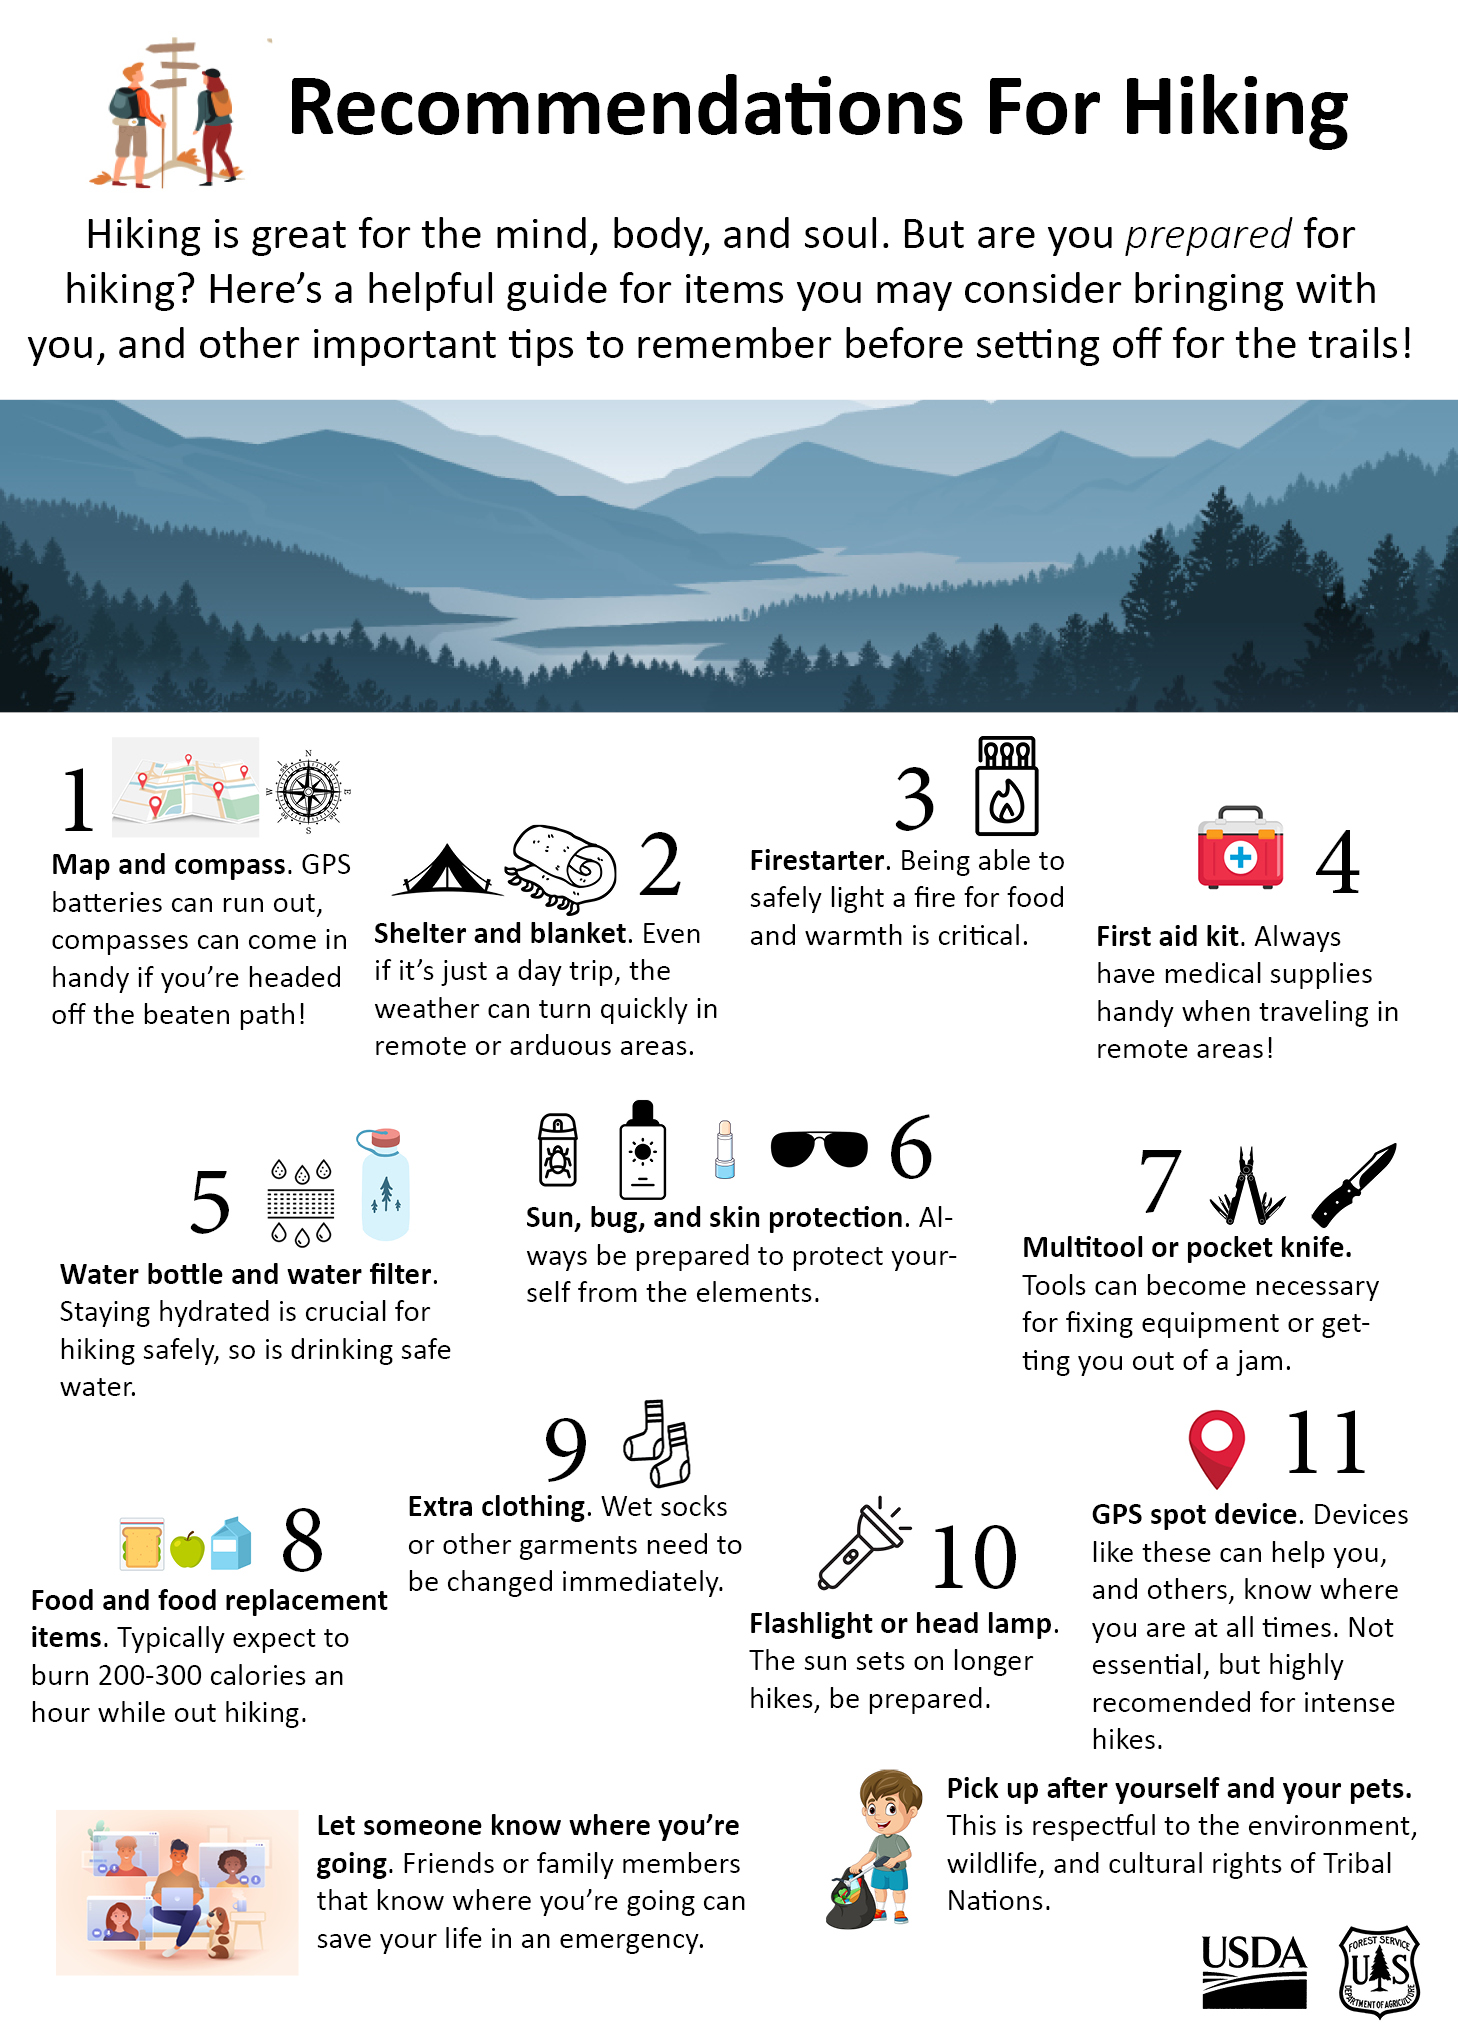 Infographic showing 11 recommendations for gear to take with you hiking